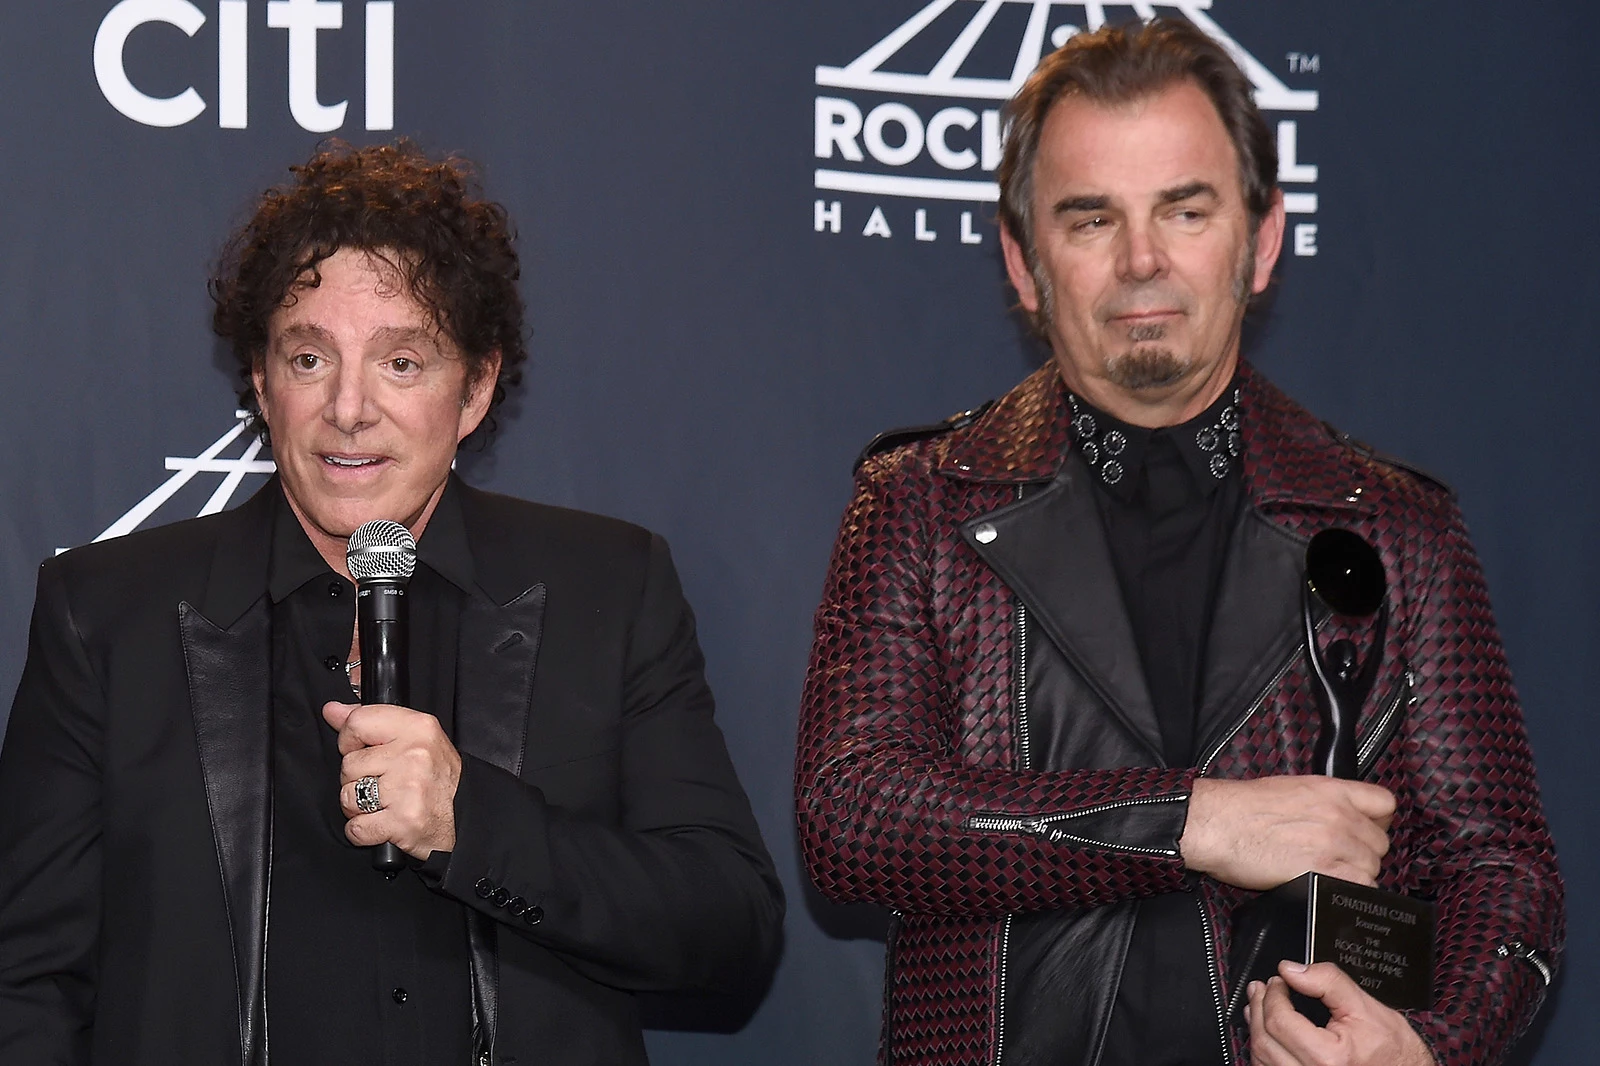 Neal Schon and Jonathan Cain